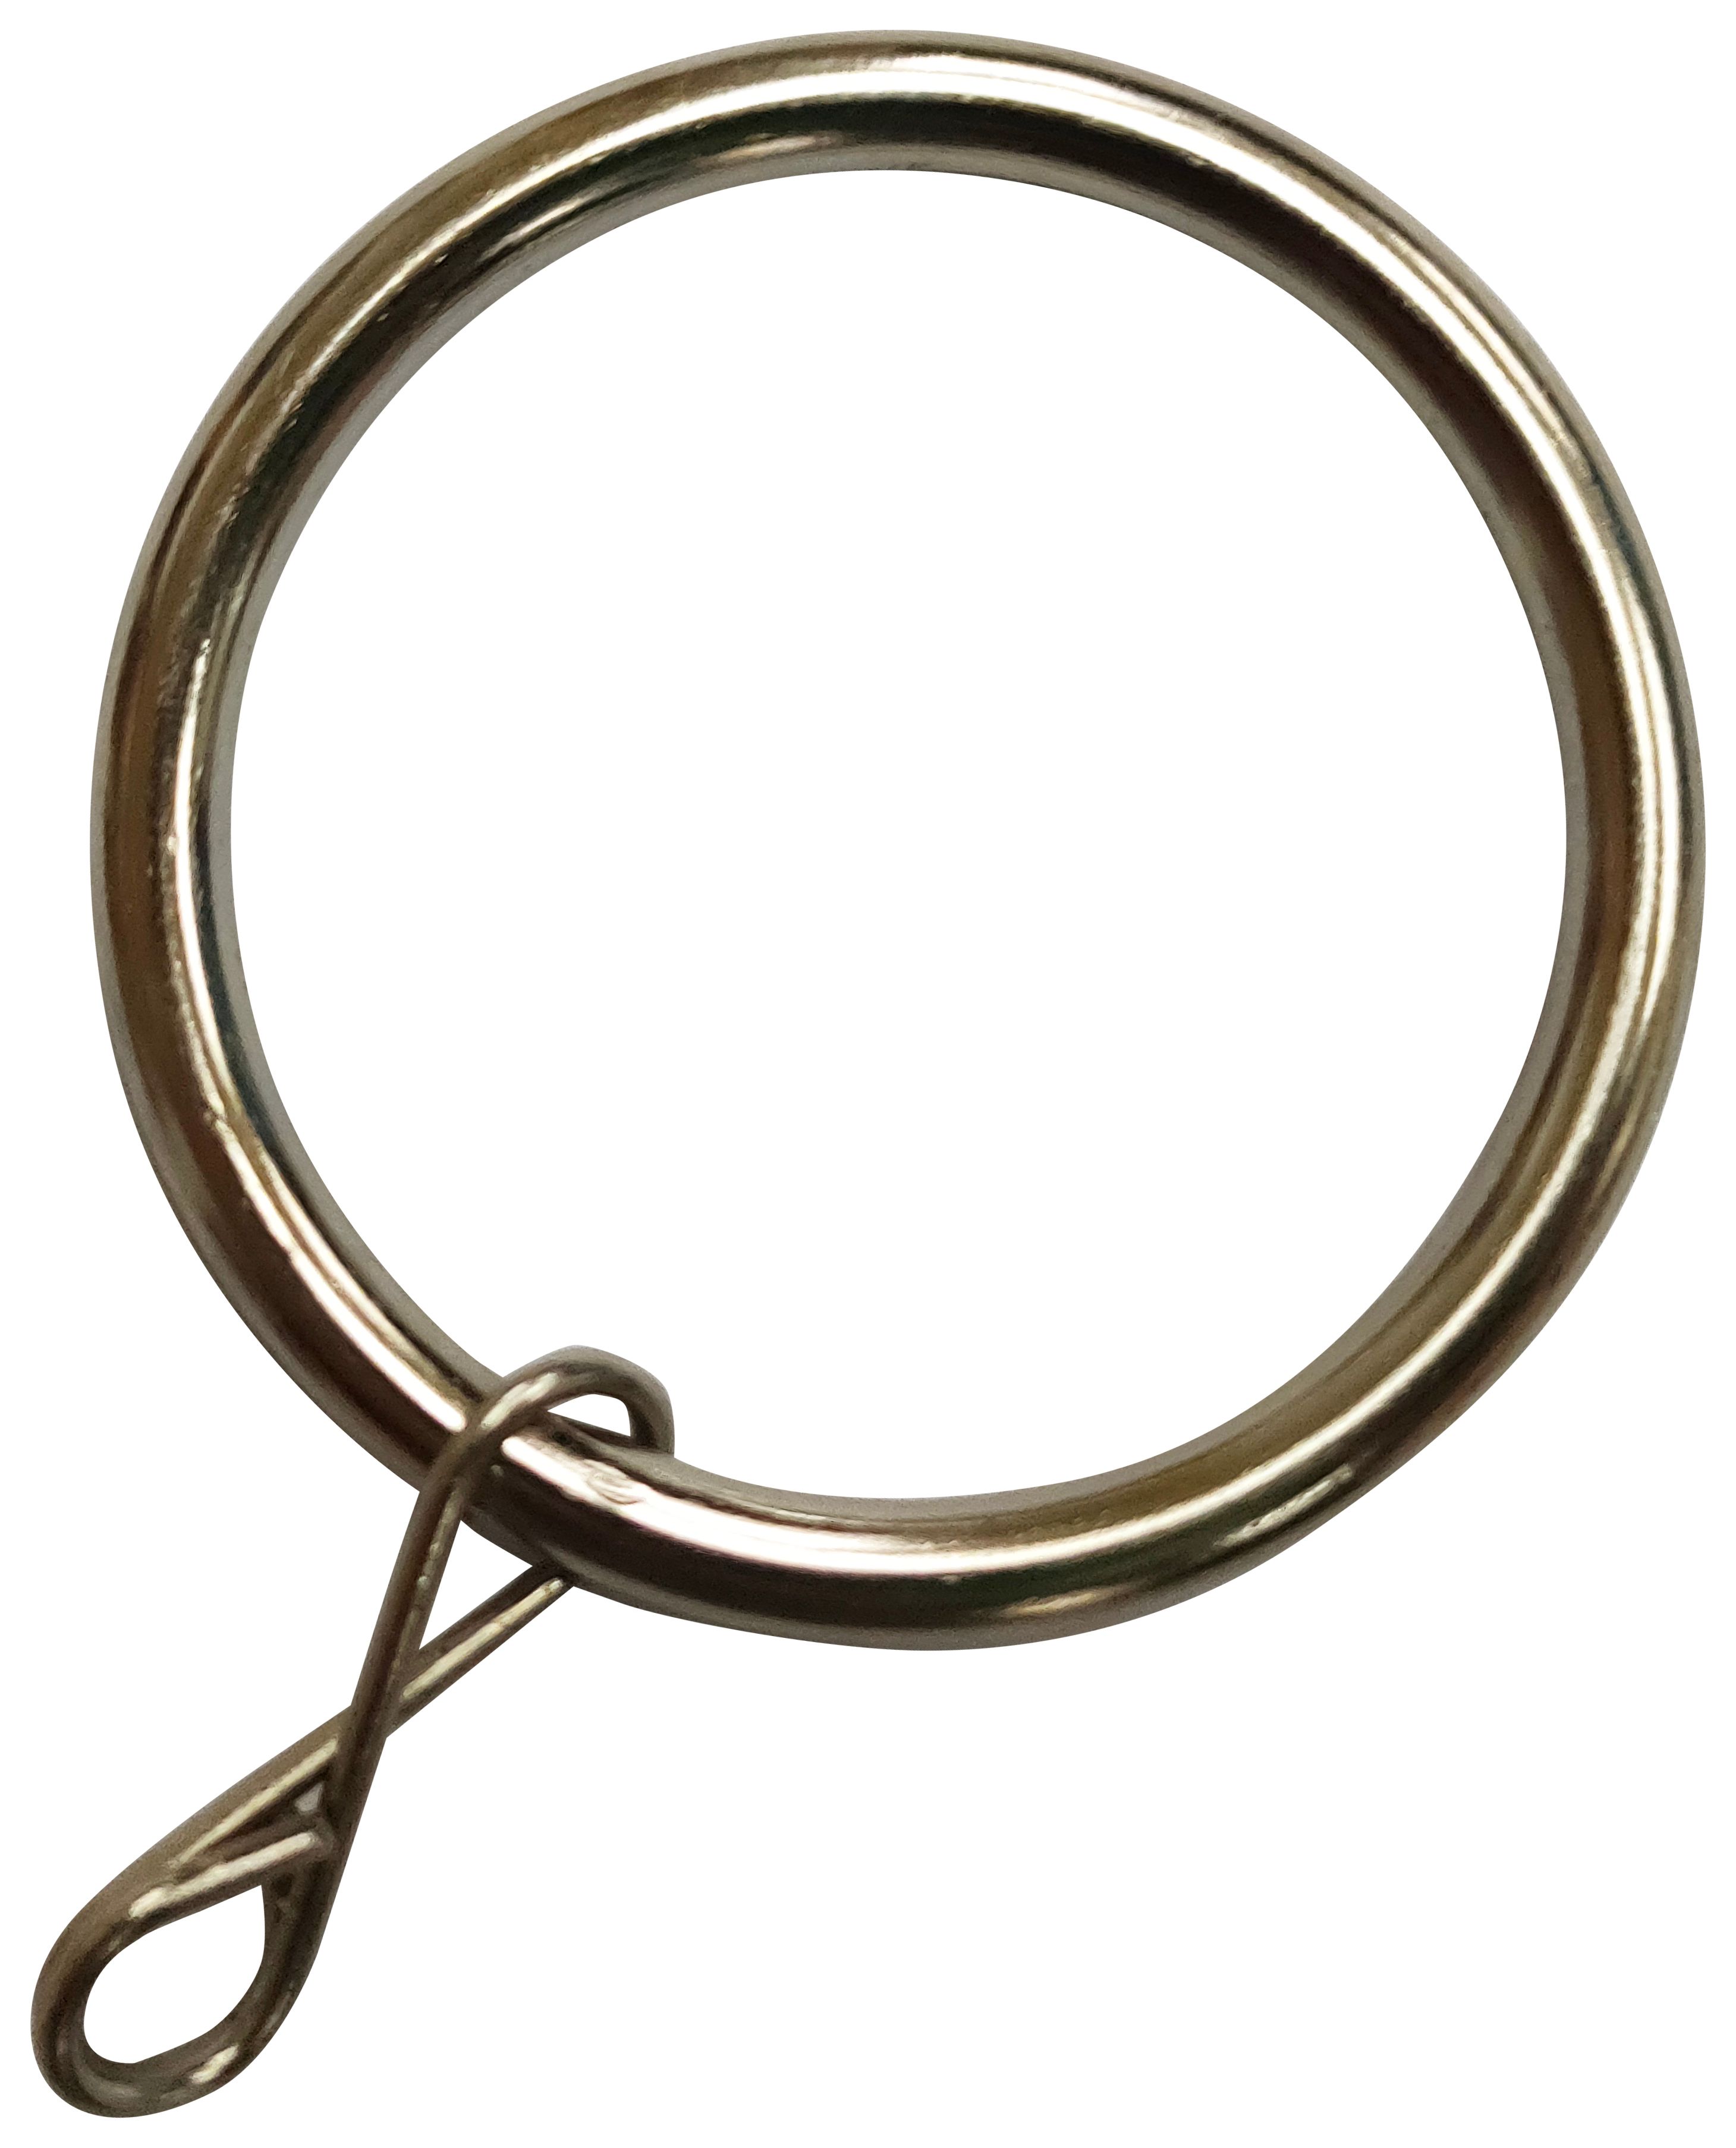 Image of Stainless Steel Effect 19mm Metal Curtain Rings - Pack of 10